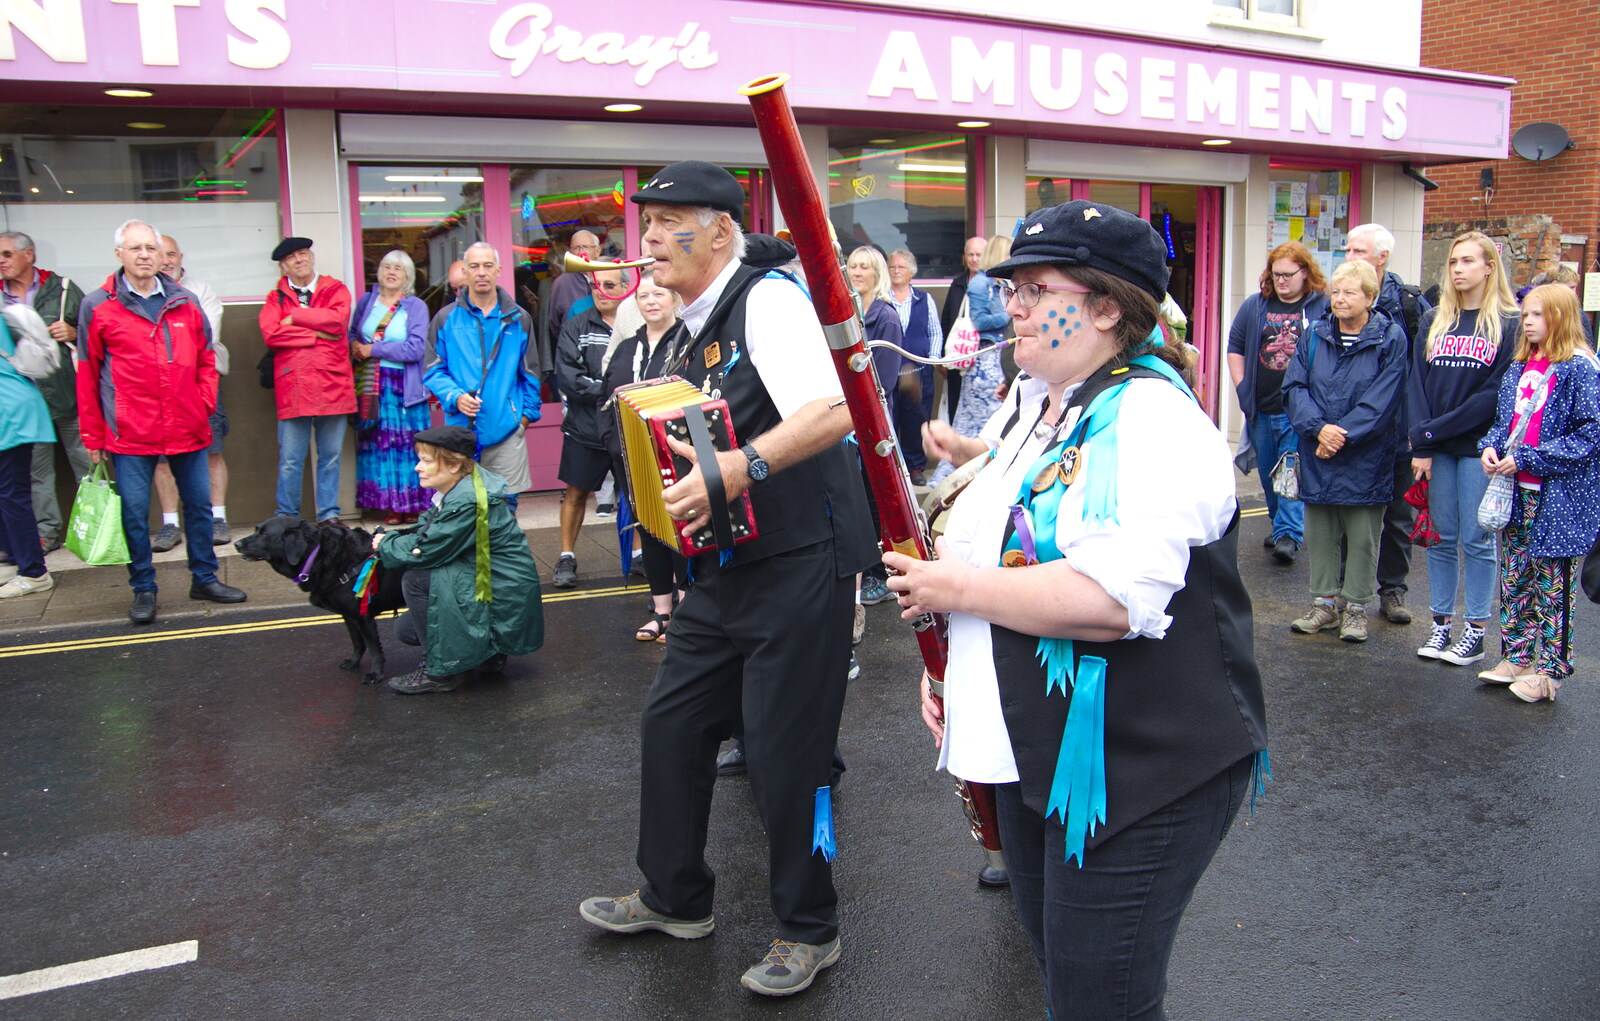 There's an actual bassoon in the Morris band from Kelling Camping and the Potty Morris Festival, Sheringham, North Norfolk - 6th July 2019